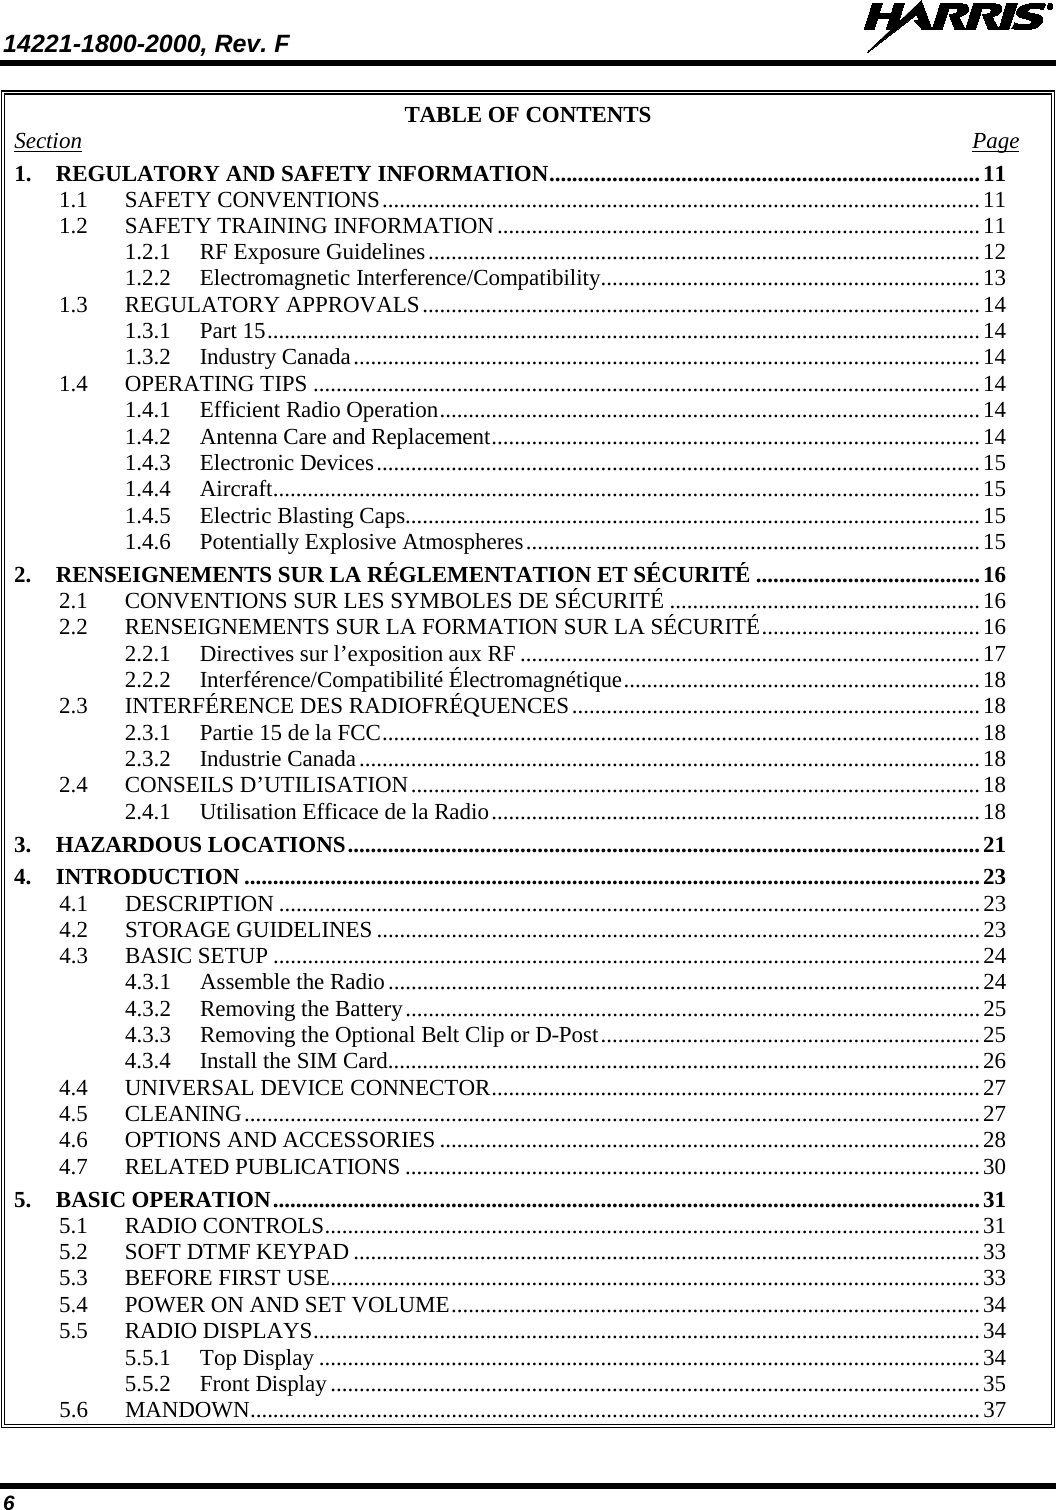 14221-1800-2000, Rev. F   6 TABLE OF CONTENTS Section  Page 1. REGULATORY AND SAFETY INFORMATION ........................................................................... 11 1.1 SAFETY CONVENTIONS ........................................................................................................ 11 1.2 SAFETY TRAINING INFORMATION .................................................................................... 11 1.2.1 RF Exposure Guidelines ................................................................................................ 12 1.2.2 Electromagnetic Interference/Compatibility .................................................................. 13 1.3 REGULATORY APPROVALS ................................................................................................. 14 1.3.1 Part 15 ............................................................................................................................ 14 1.3.2 Industry Canada ............................................................................................................. 14 1.4 OPERATING TIPS .................................................................................................................... 14 1.4.1 Efficient Radio Operation .............................................................................................. 14 1.4.2 Antenna Care and Replacement ..................................................................................... 14 1.4.3 Electronic Devices ......................................................................................................... 15 1.4.4 Aircraft ........................................................................................................................... 15 1.4.5 Electric Blasting Caps .................................................................................................... 15 1.4.6 Potentially Explosive Atmospheres ............................................................................... 15 2. RENSEIGNEMENTS SUR LA RÉGLEMENTATION ET SÉCURITÉ ....................................... 16 2.1 CONVENTIONS SUR LES SYMBOLES DE SÉCURITÉ ...................................................... 16 2.2 RENSEIGNEMENTS SUR LA FORMATION SUR LA SÉCURITÉ ...................................... 16 2.2.1 Directives sur l’exposition aux RF ................................................................................ 17 2.2.2 Interférence/Compatibilité Électromagnétique .............................................................. 18 2.3 INTERFÉRENCE DES RADIOFRÉQUENCES ....................................................................... 18 2.3.1 Partie 15 de la FCC ........................................................................................................ 18 2.3.2 Industrie Canada ............................................................................................................ 18 2.4 CONSEILS D’UTILISATION ................................................................................................... 18 2.4.1 Utilisation Efficace de la Radio ..................................................................................... 18 3. HAZARDOUS LOCATIONS .............................................................................................................. 21 4. INTRODUCTION ................................................................................................................................ 23 4.1 DESCRIPTION .......................................................................................................................... 23 4.2 STORAGE GUIDELINES ......................................................................................................... 23 4.3 BASIC SETUP ........................................................................................................................... 24 4.3.1 Assemble the Radio ....................................................................................................... 24 4.3.2 Removing the Battery .................................................................................................... 25 4.3.3 Removing the Optional Belt Clip or D-Post .................................................................. 25 4.3.4 Install the SIM Card ....................................................................................................... 26 4.4 UNIVERSAL DEVICE CONNECTOR ..................................................................................... 27 4.5 CLEANING ................................................................................................................................ 27 4.6 OPTIONS AND ACCESSORIES .............................................................................................. 28 4.7 RELATED PUBLICATIONS .................................................................................................... 30 5. BASIC OPERATION ........................................................................................................................... 31 5.1 RADIO CONTROLS .................................................................................................................. 31 5.2 SOFT DTMF KEYPAD ............................................................................................................. 33 5.3 BEFORE FIRST USE ................................................................................................................. 33 5.4 POWER ON AND SET VOLUME ............................................................................................ 34 5.5 RADIO DISPLAYS .................................................................................................................... 34 5.5.1 Top Display ................................................................................................................... 34 5.5.2 Front Display ................................................................................................................. 35 5.6 MANDOWN ............................................................................................................................... 37 